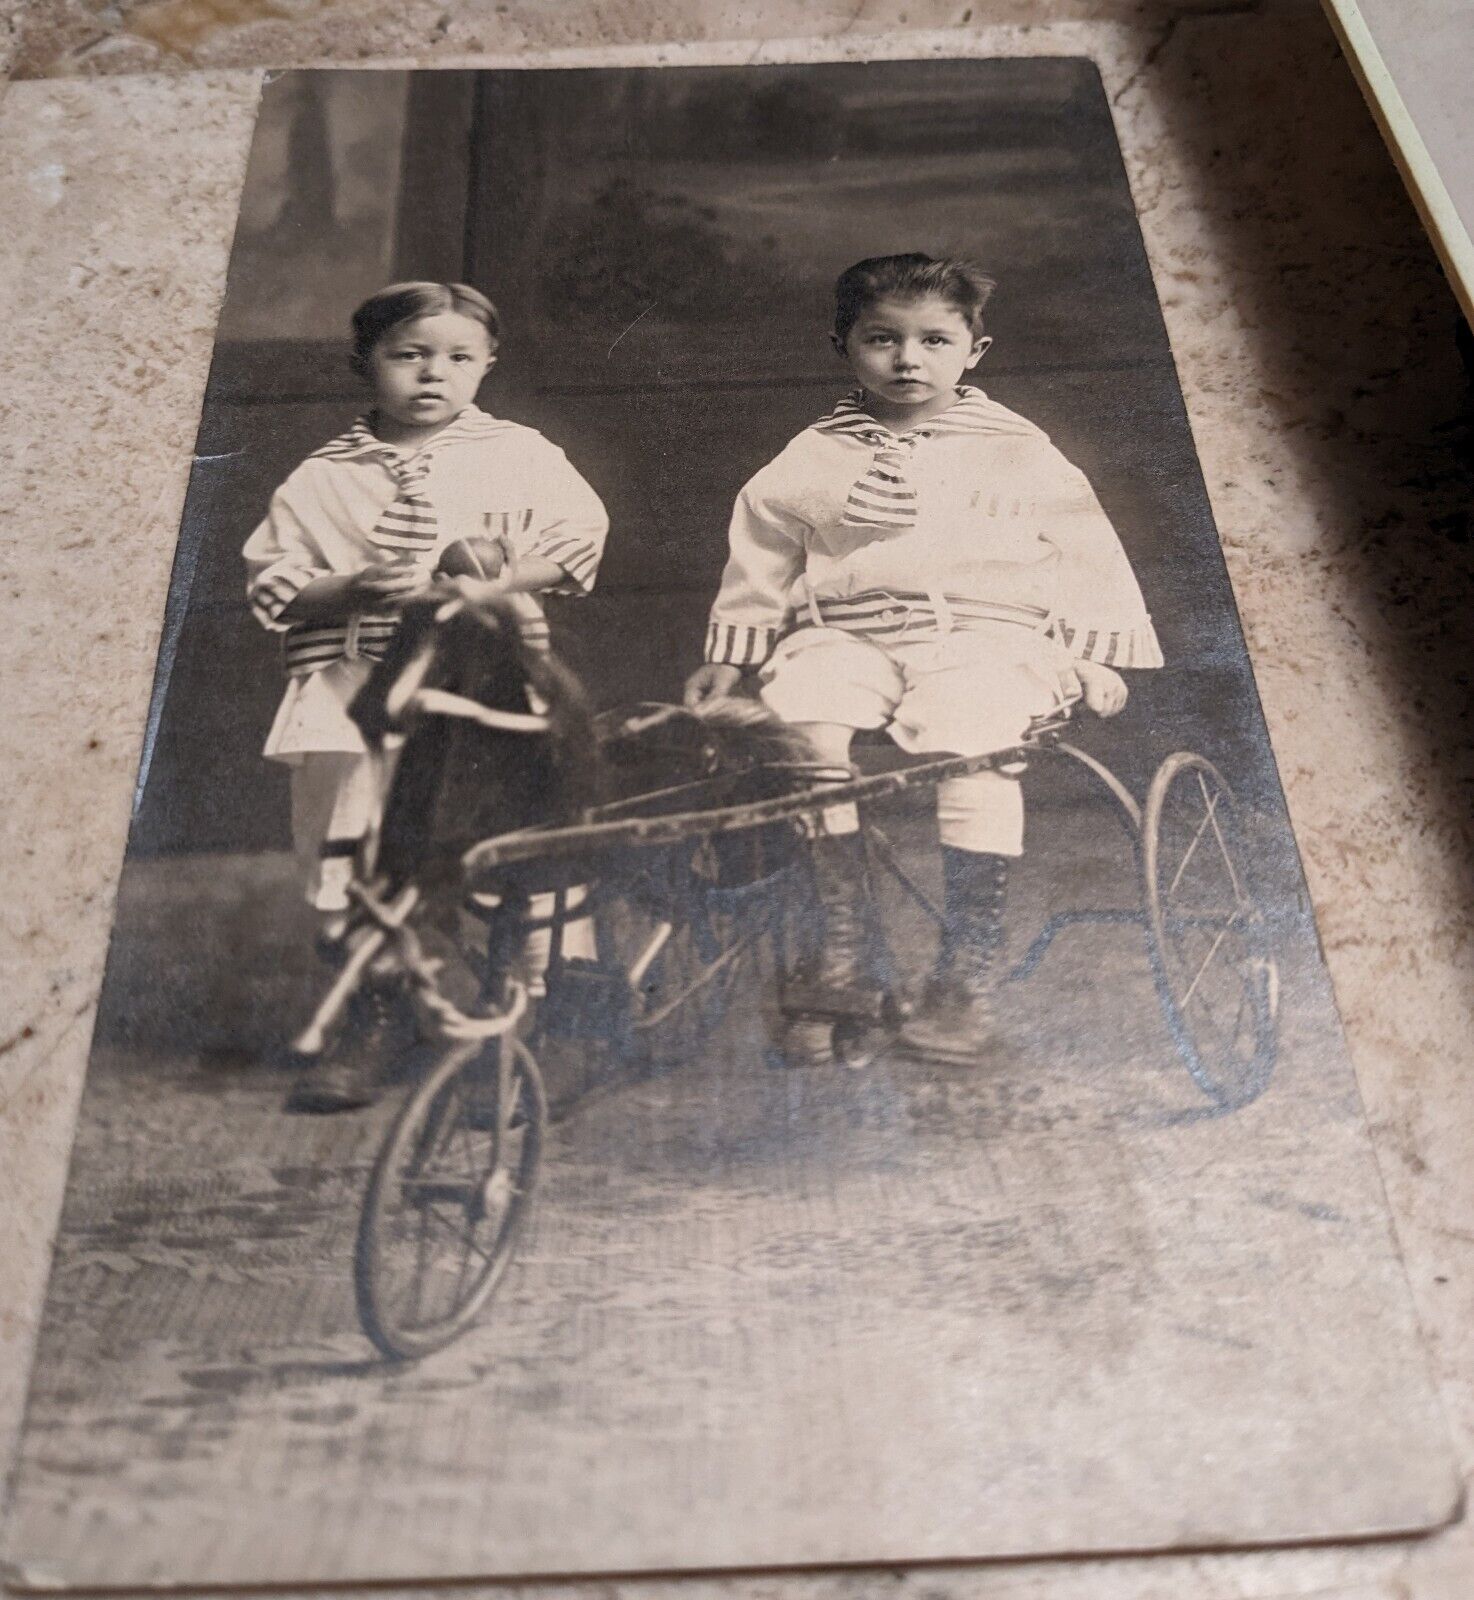 VINATGE RPPC TWO YOUNG CUTE BOYS DRESSED IN SAME CLOTHING, SITTING ON A TRICYCLE